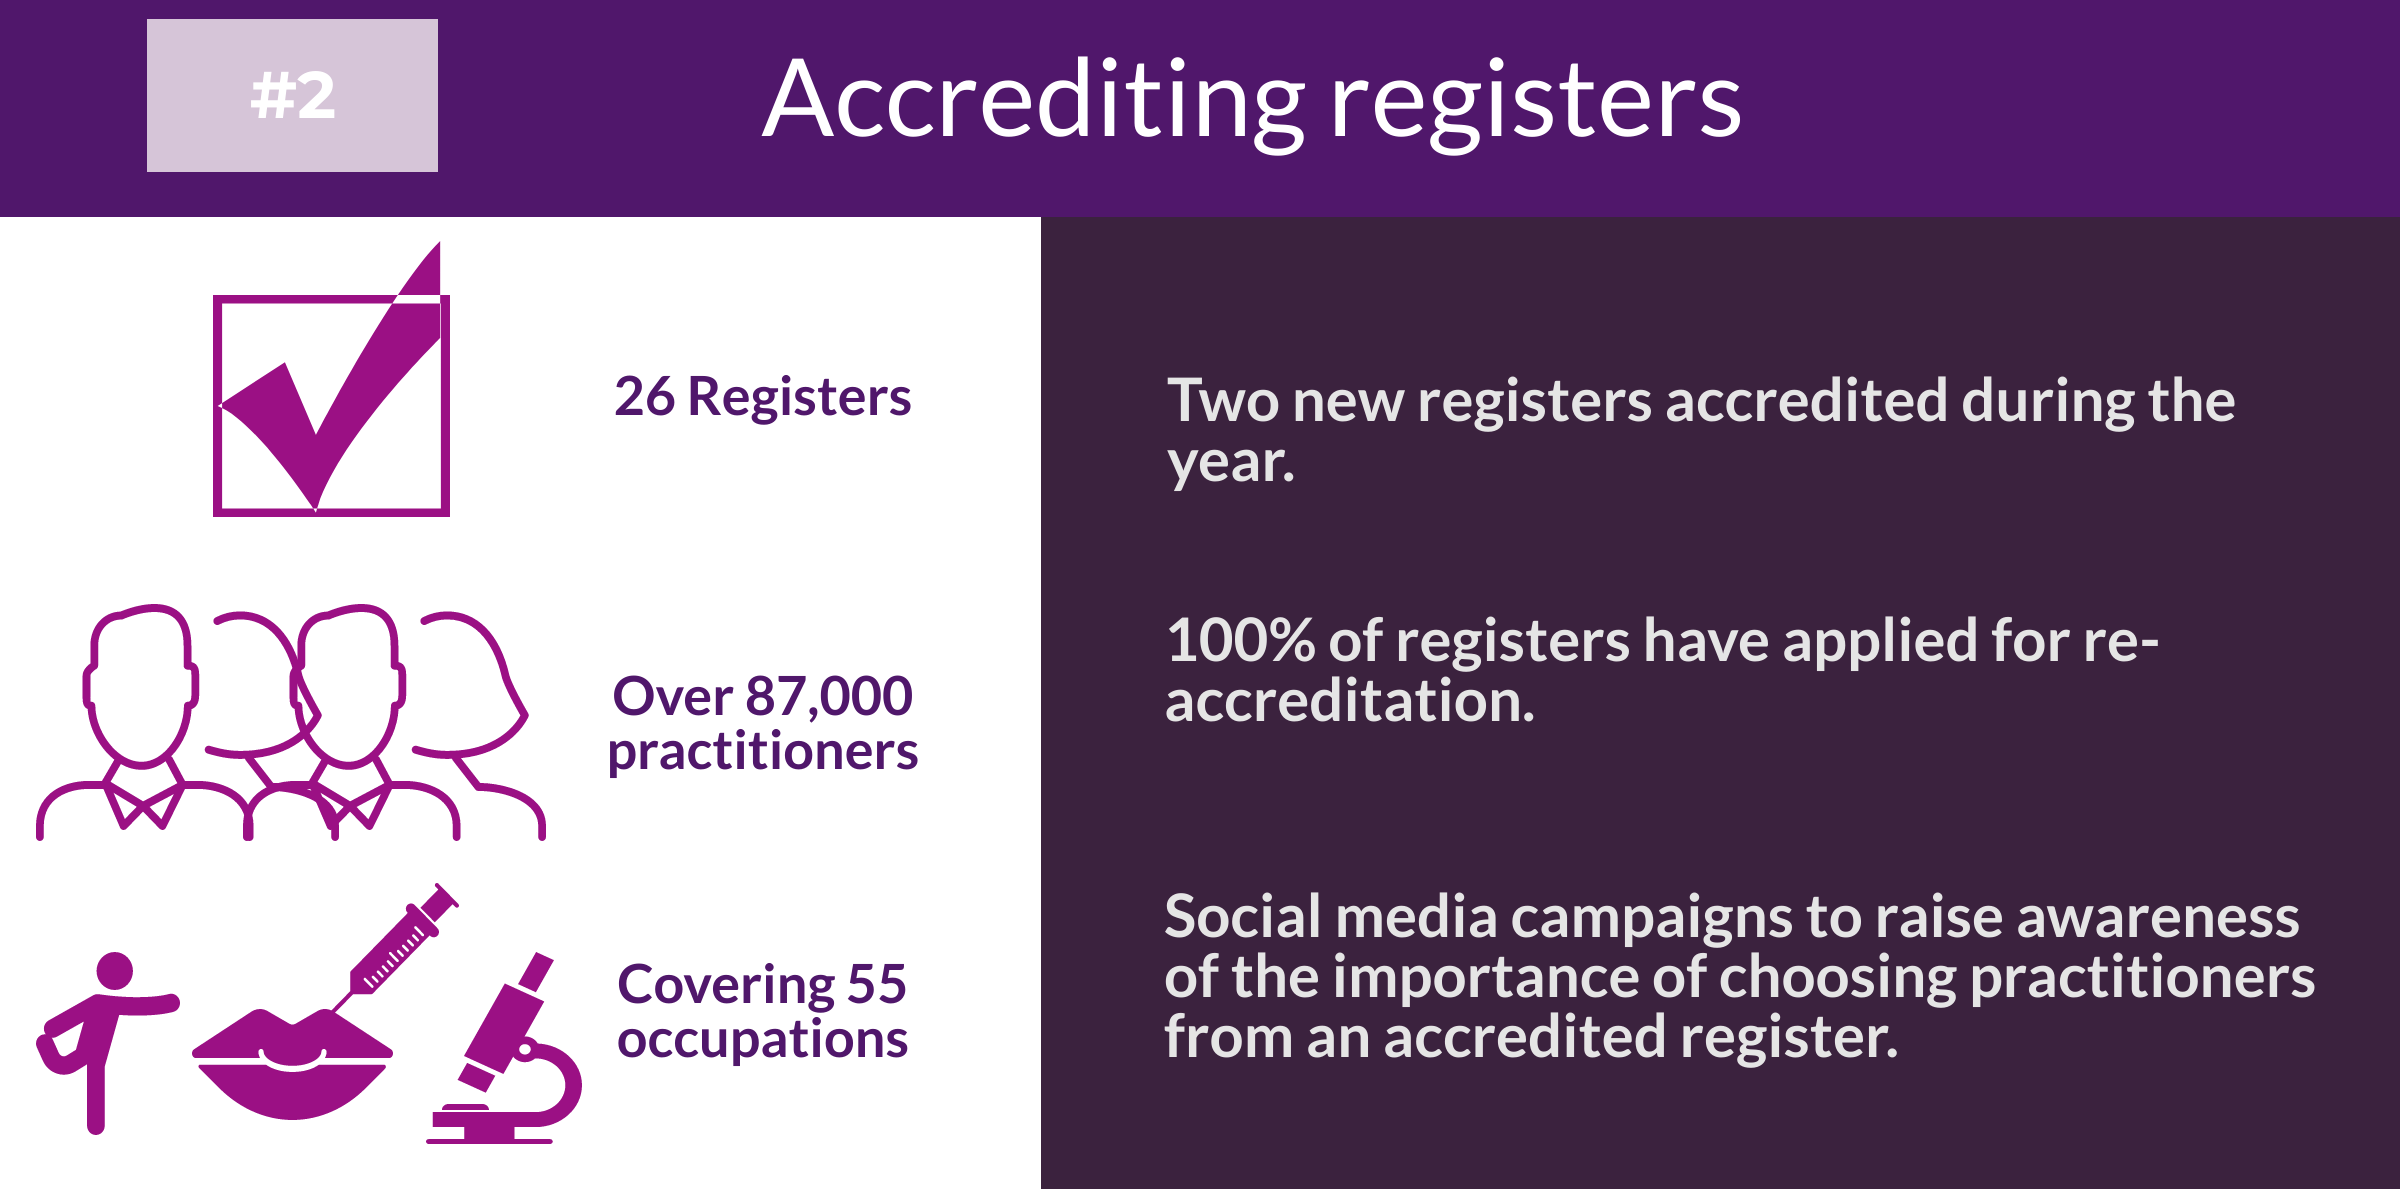 Annual report highlights - accrediting registers